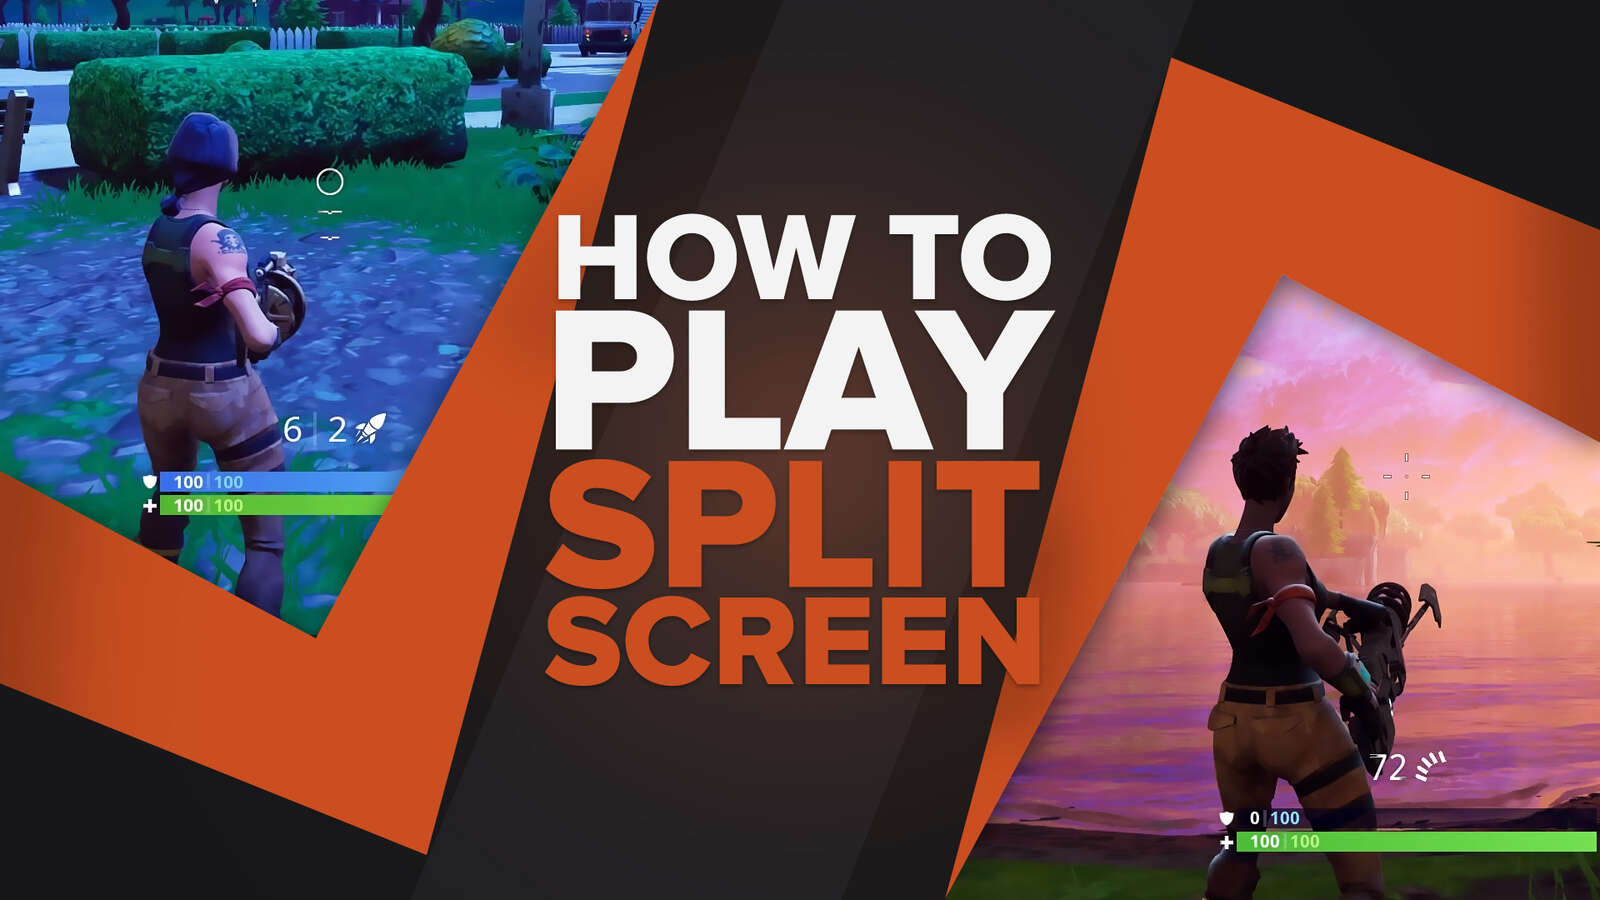 How To Play Fortnite in Split Screen Mode [Step-by-Step]